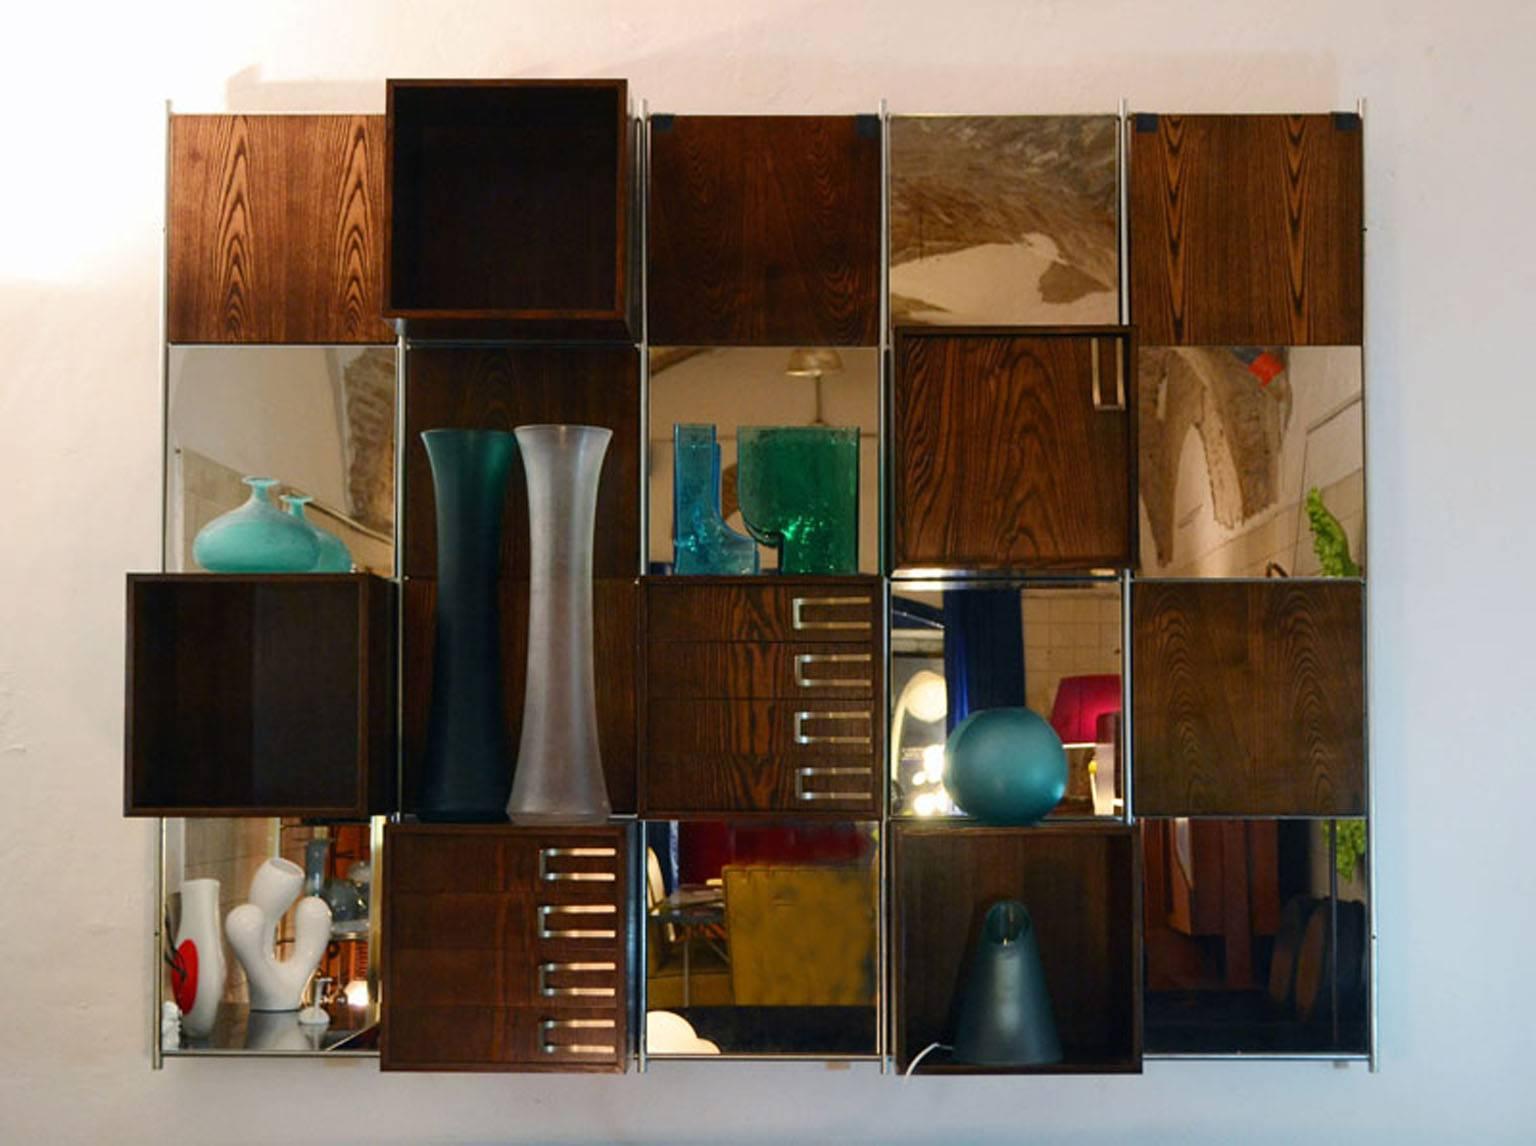 Wall unit on design of Italian 1970s production.
Oakwood with mirrors and drawers.
Modular system can be arranged at will.